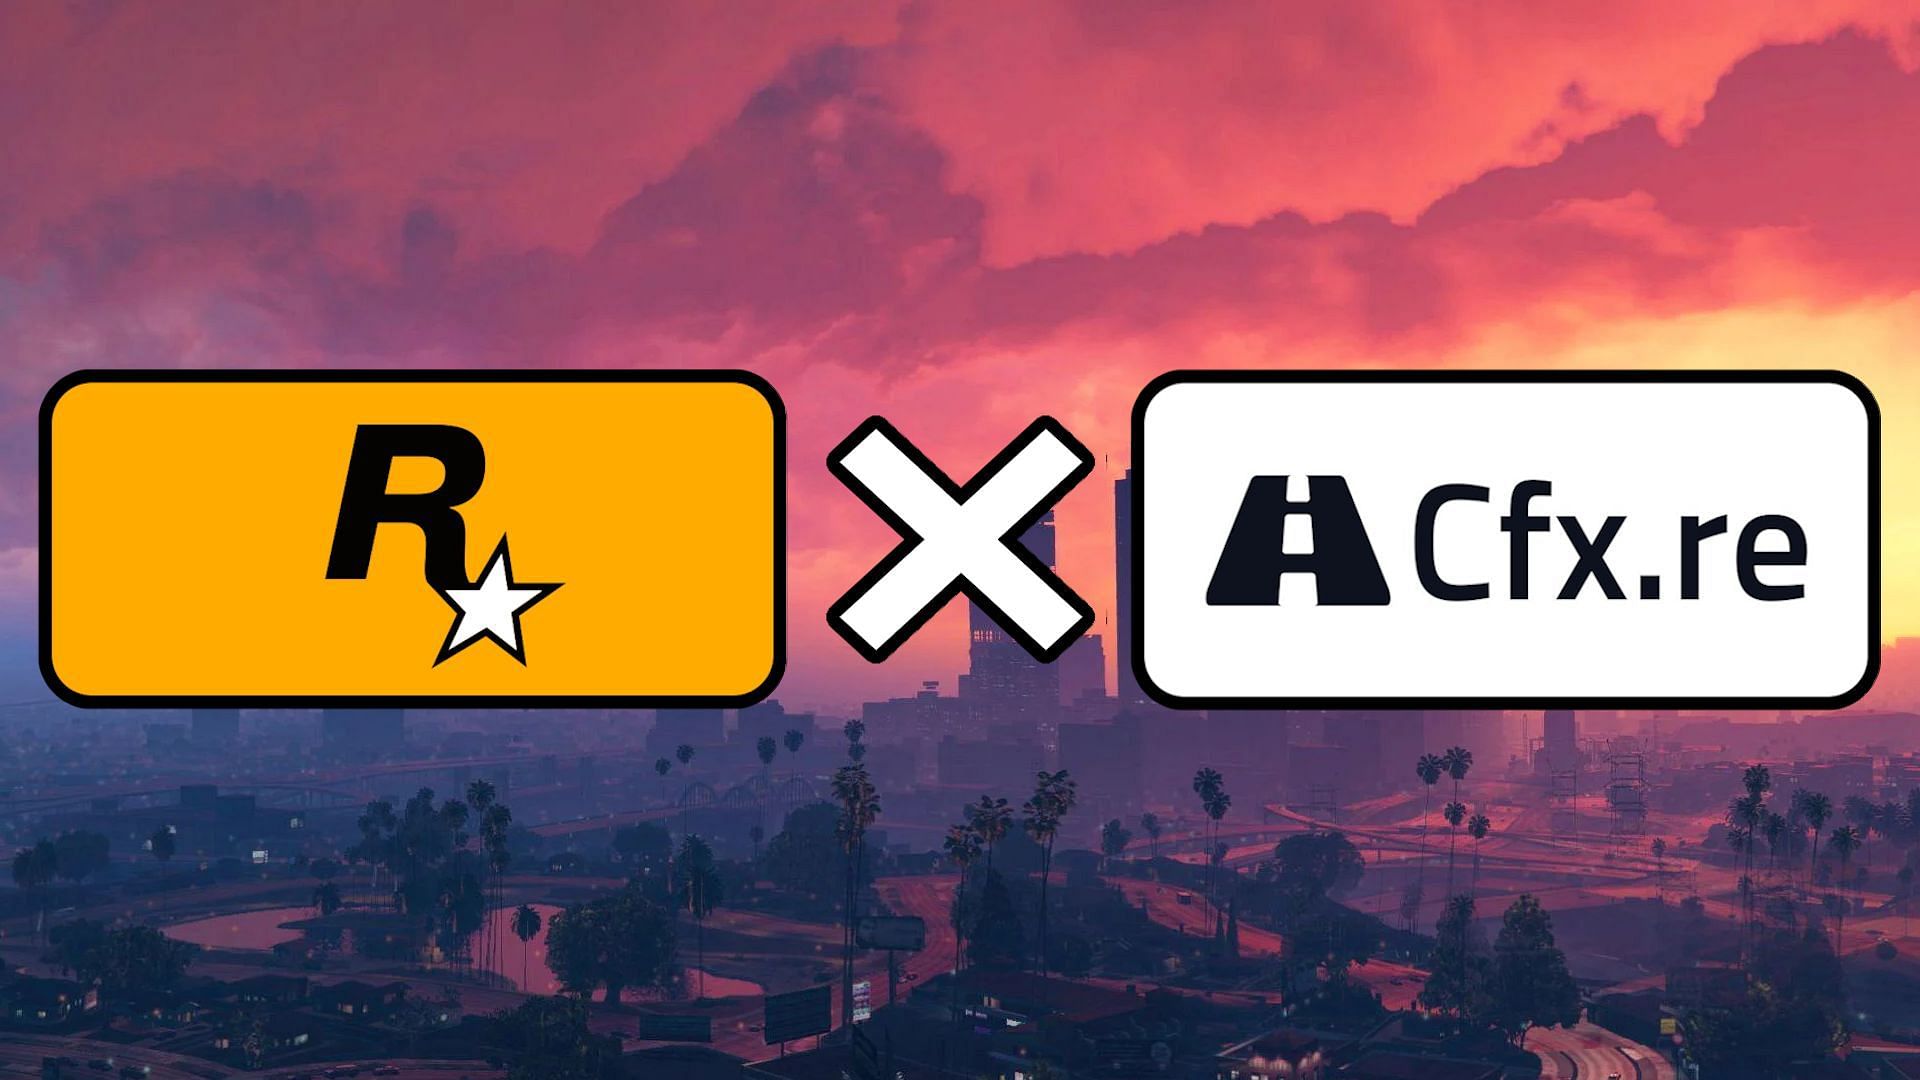 Rockstar officially acquires GTA 5 RP FiveM developers Cfx.re (Roleplay  Community Update)